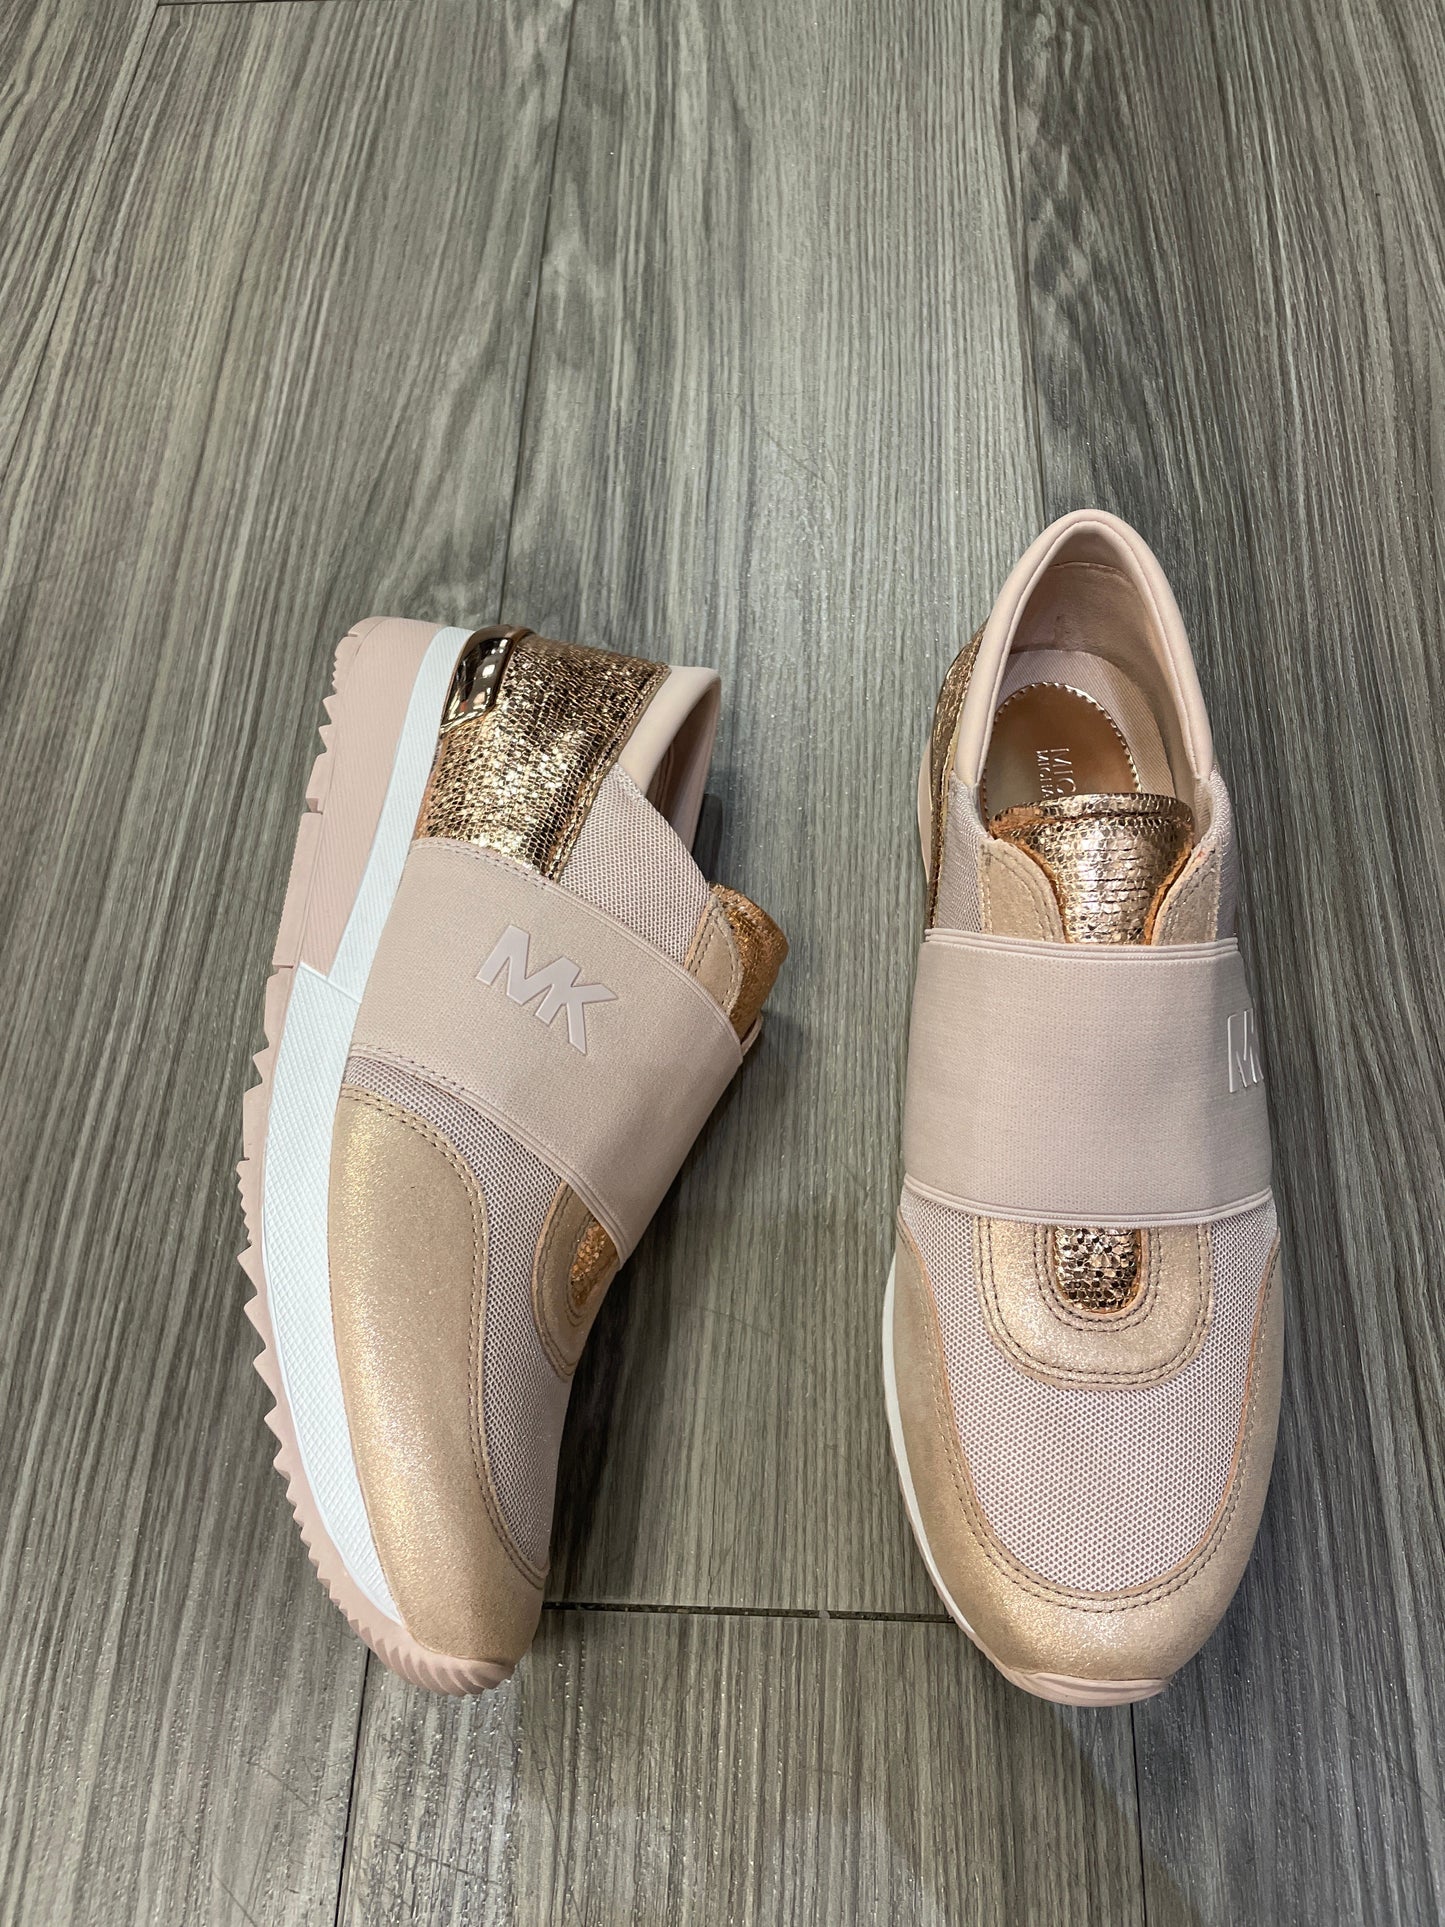 Pink Shoes Sneakers Michael Kors, Size 9